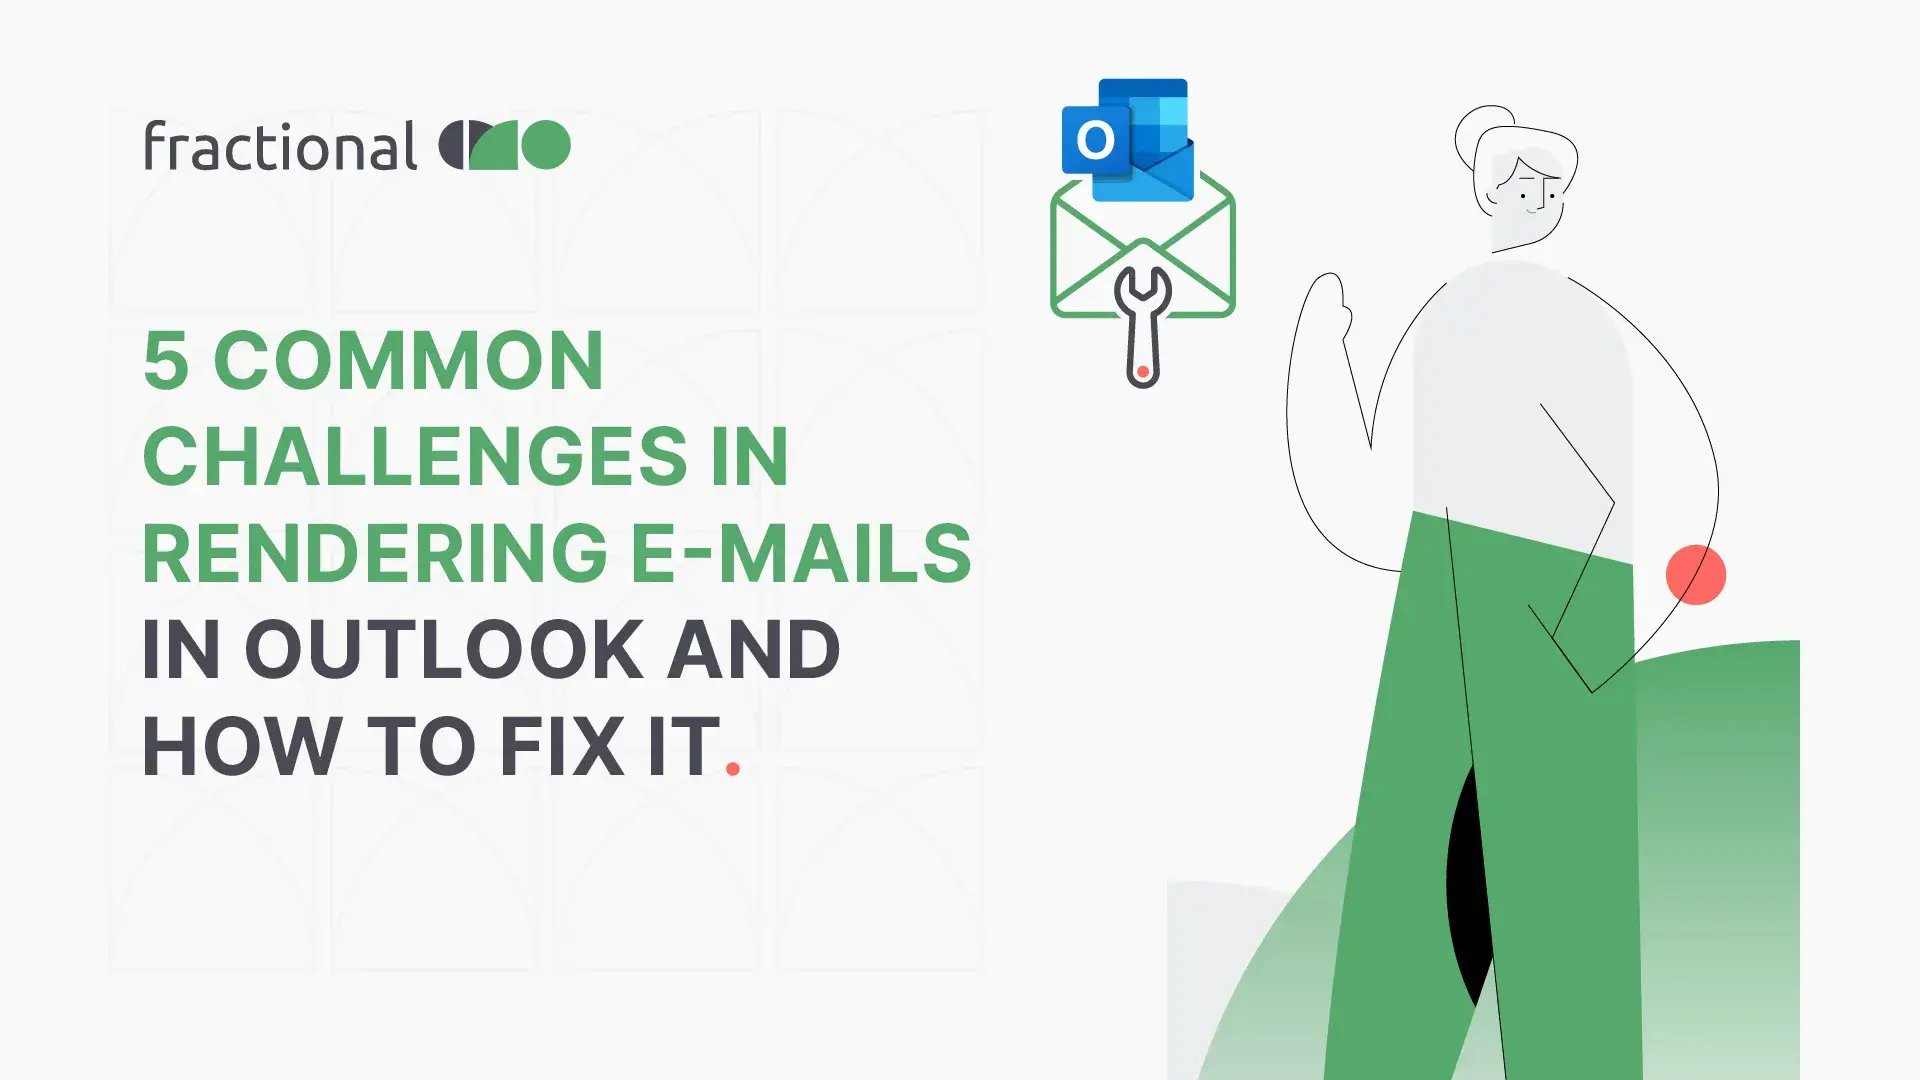 5 Common Challenges In Rendering E-mails - Blog Image